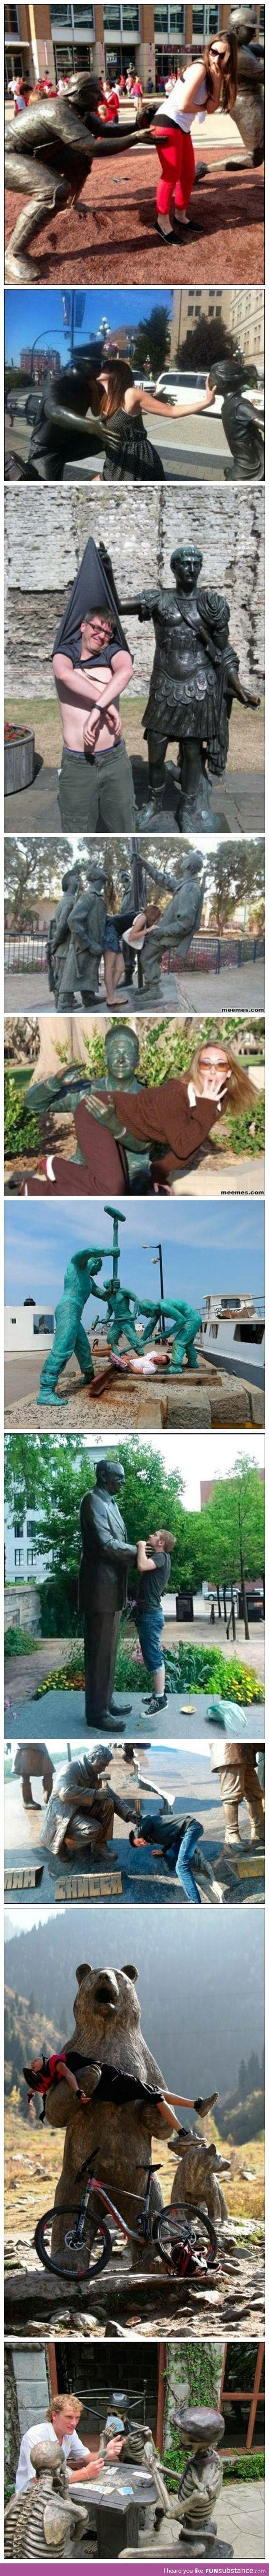 Having fun with statues...